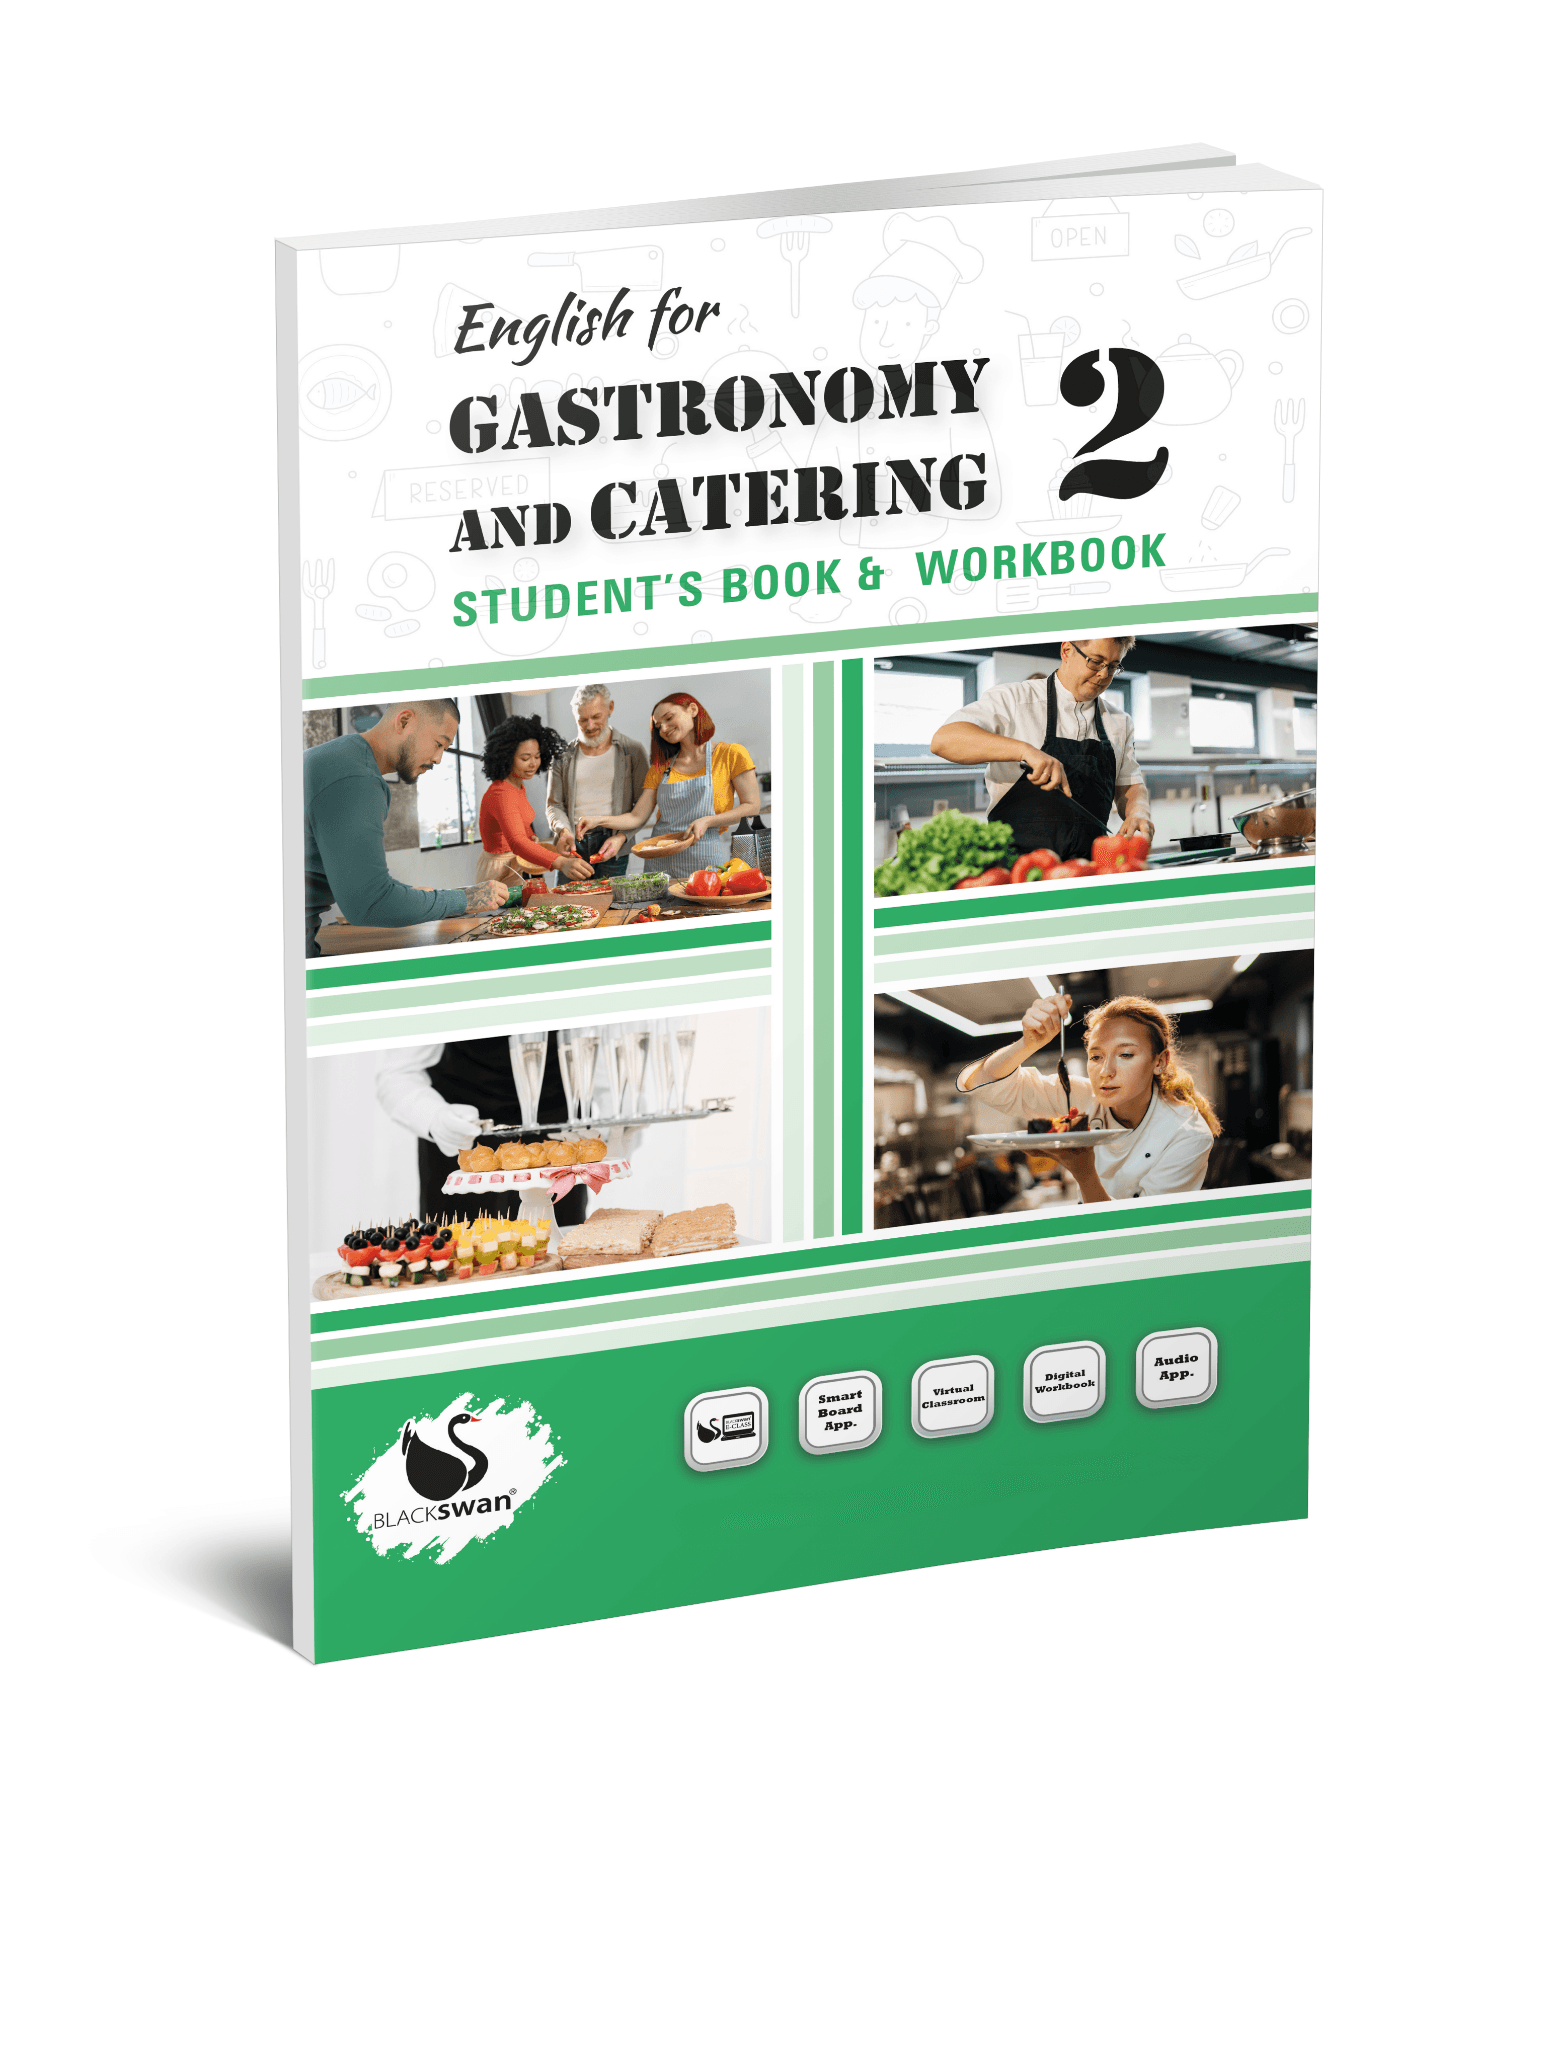 English for Gastronomy and Catering 2 Student's Book & Workbook